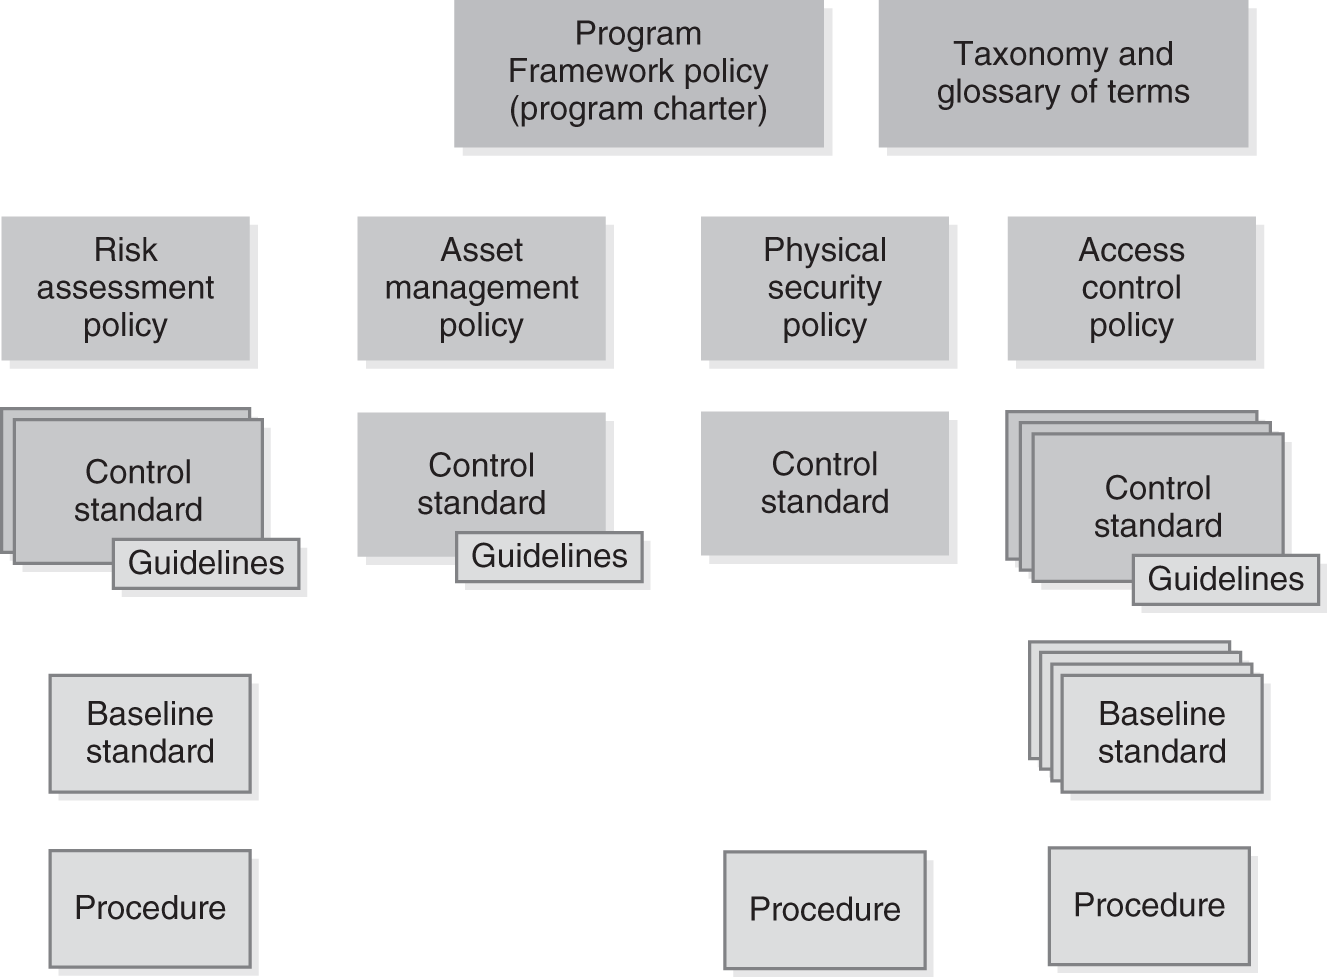 The I T policy framework and hierarchy.